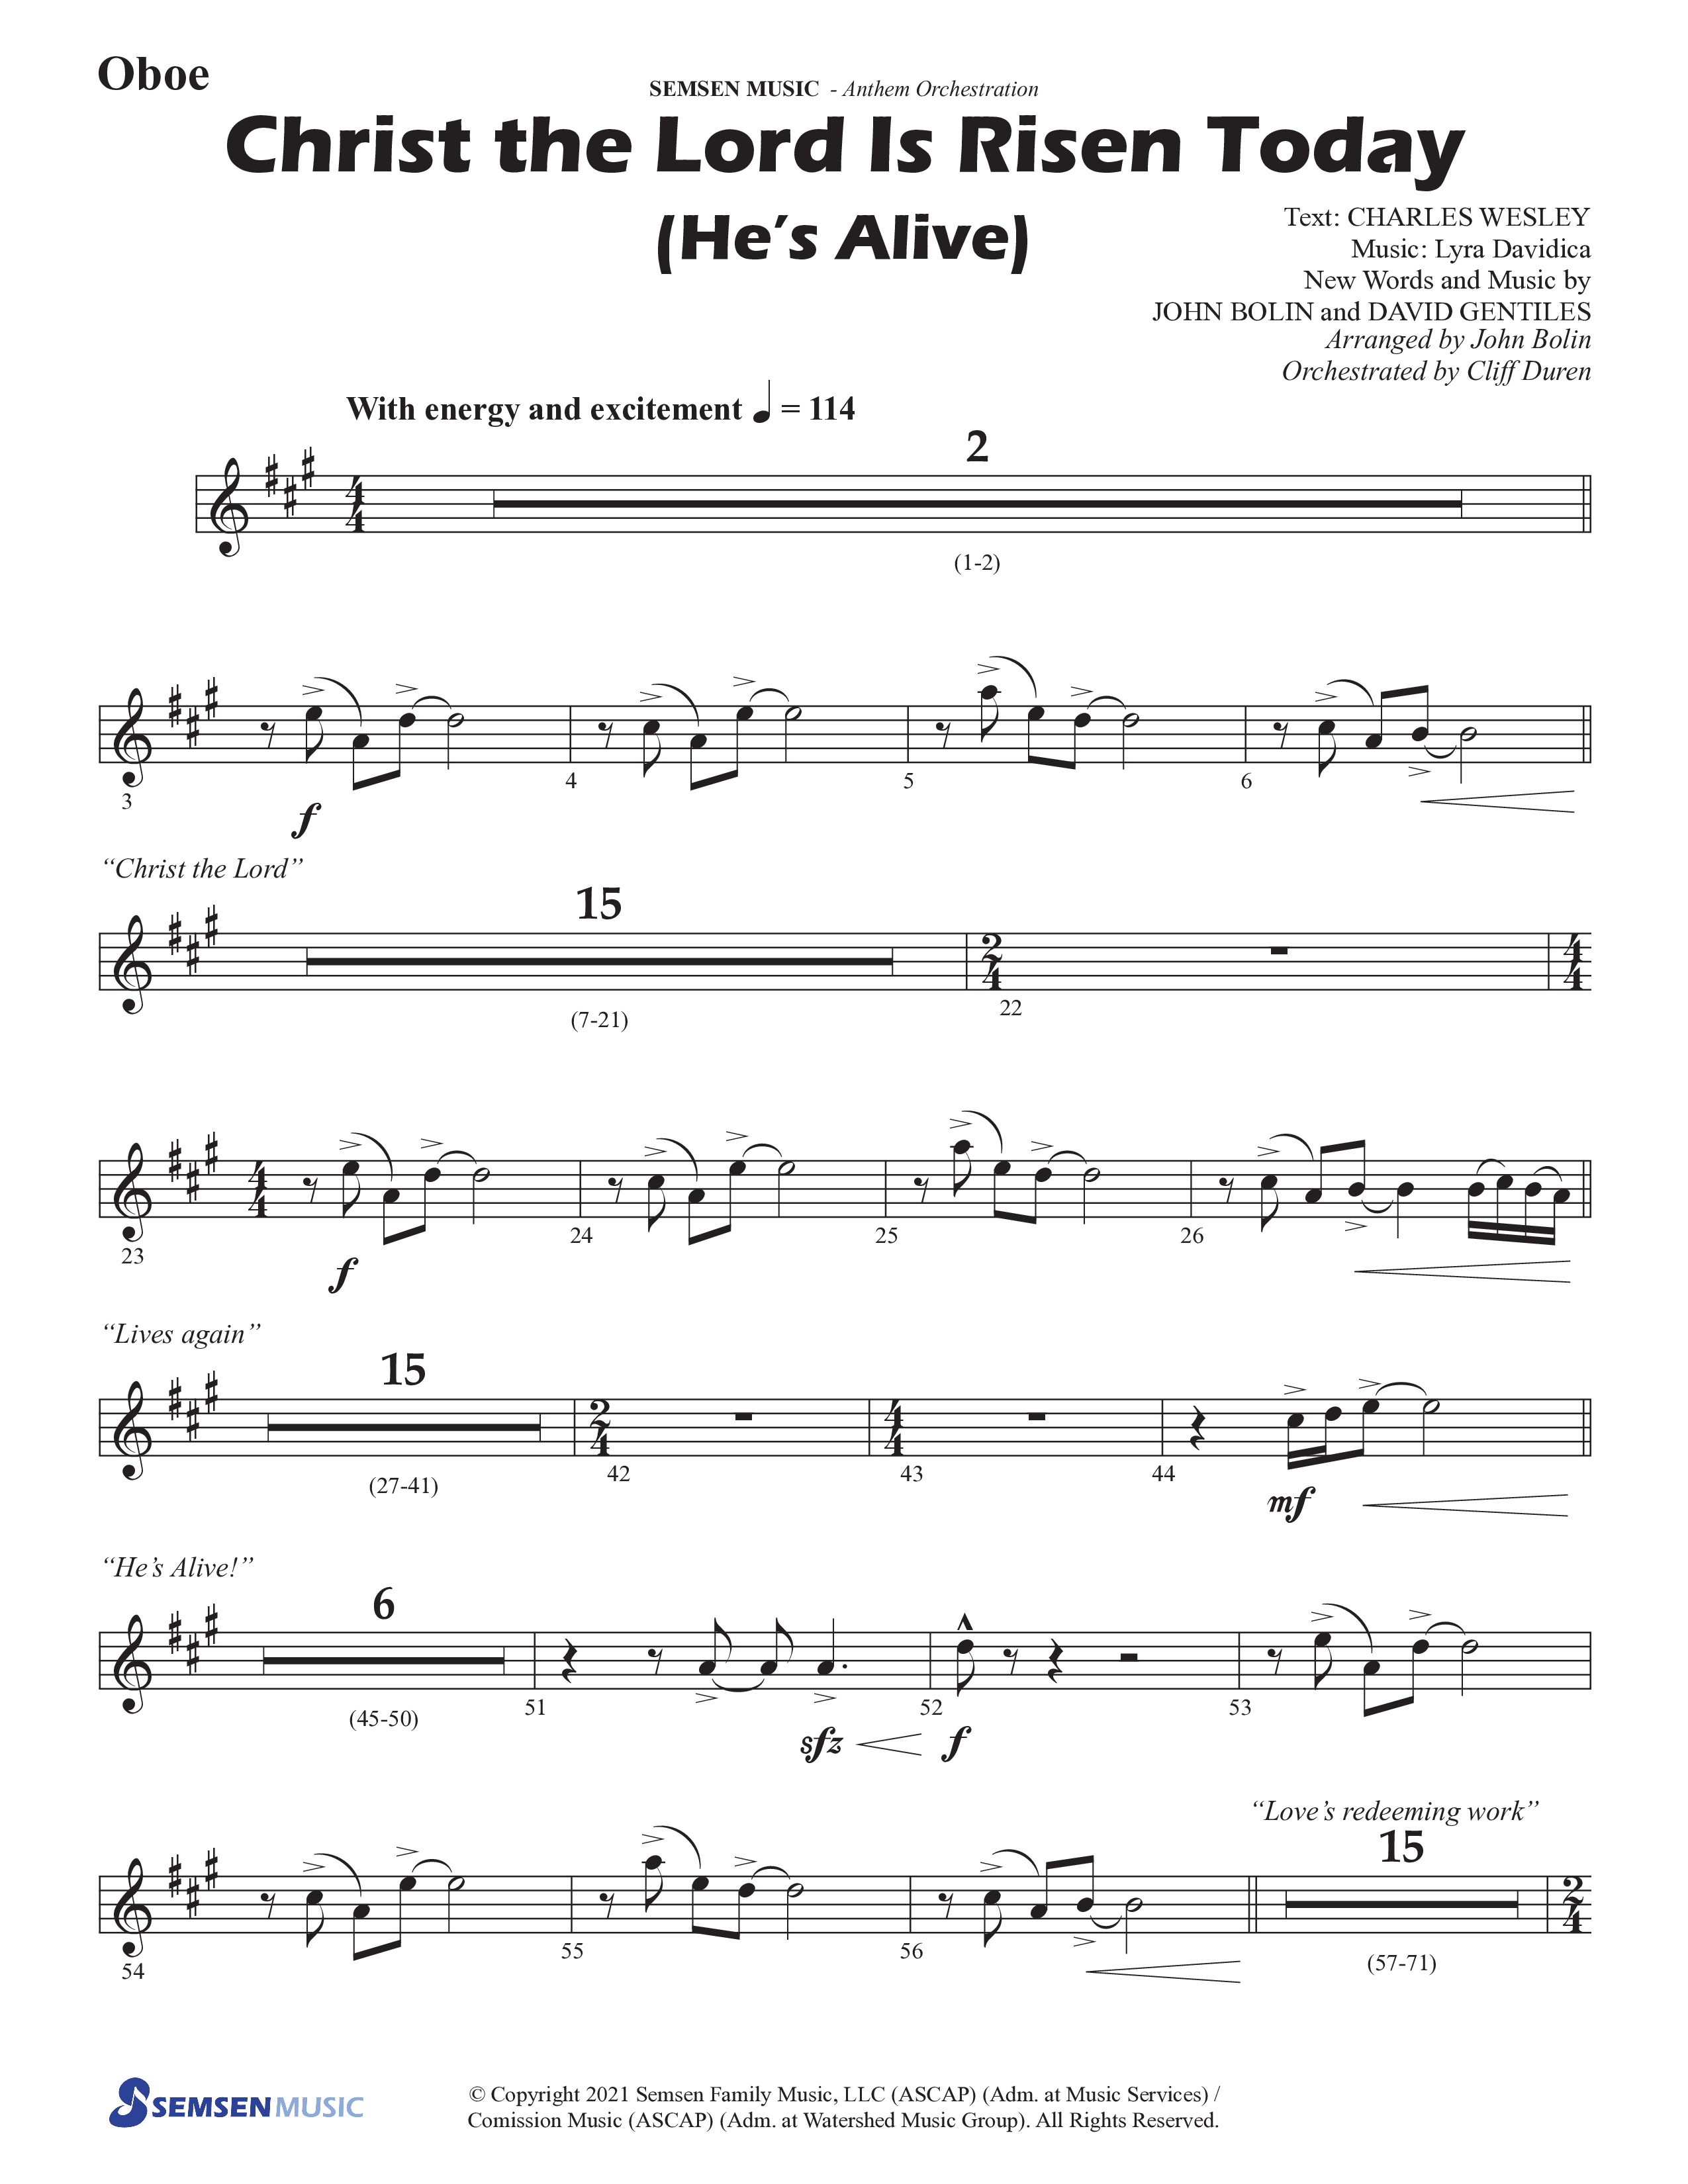 Christ The Lord Is Risen Today (He's Alive) (Choral Anthem SATB) Oboe (Semsen Music / Arr. John Bolin / Orch. Cliff Duren)